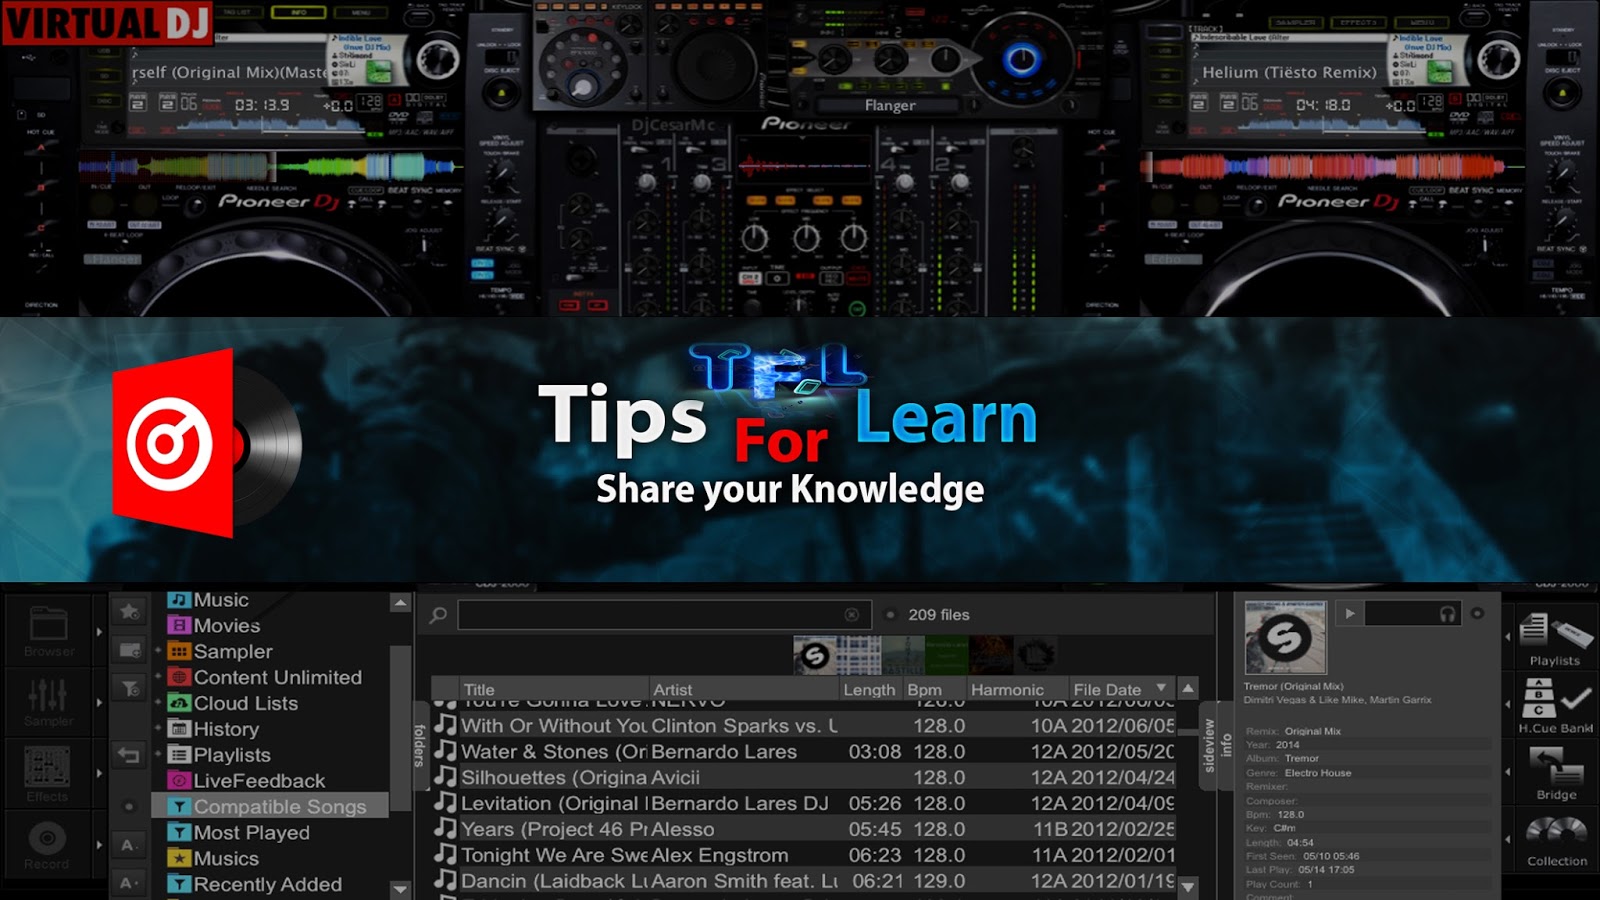 Virtual dj 8 crack software download for pc free